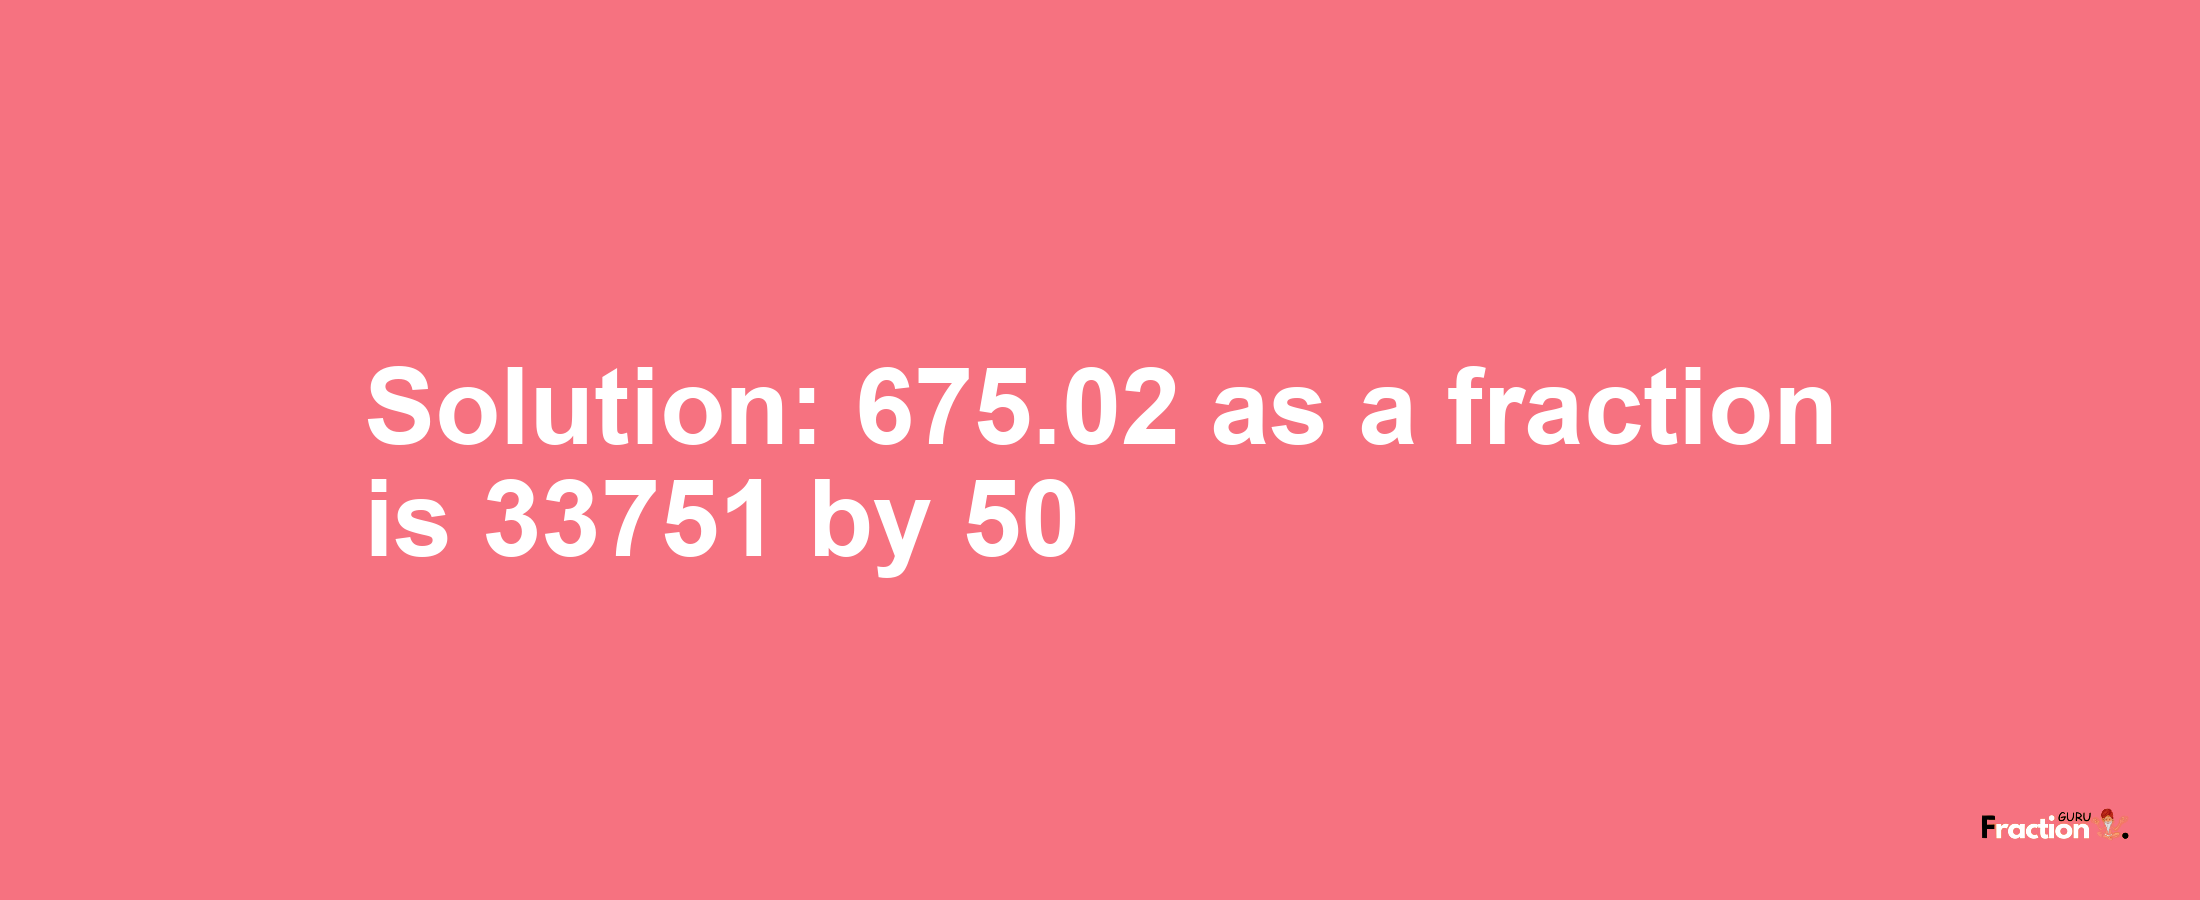 Solution:675.02 as a fraction is 33751/50